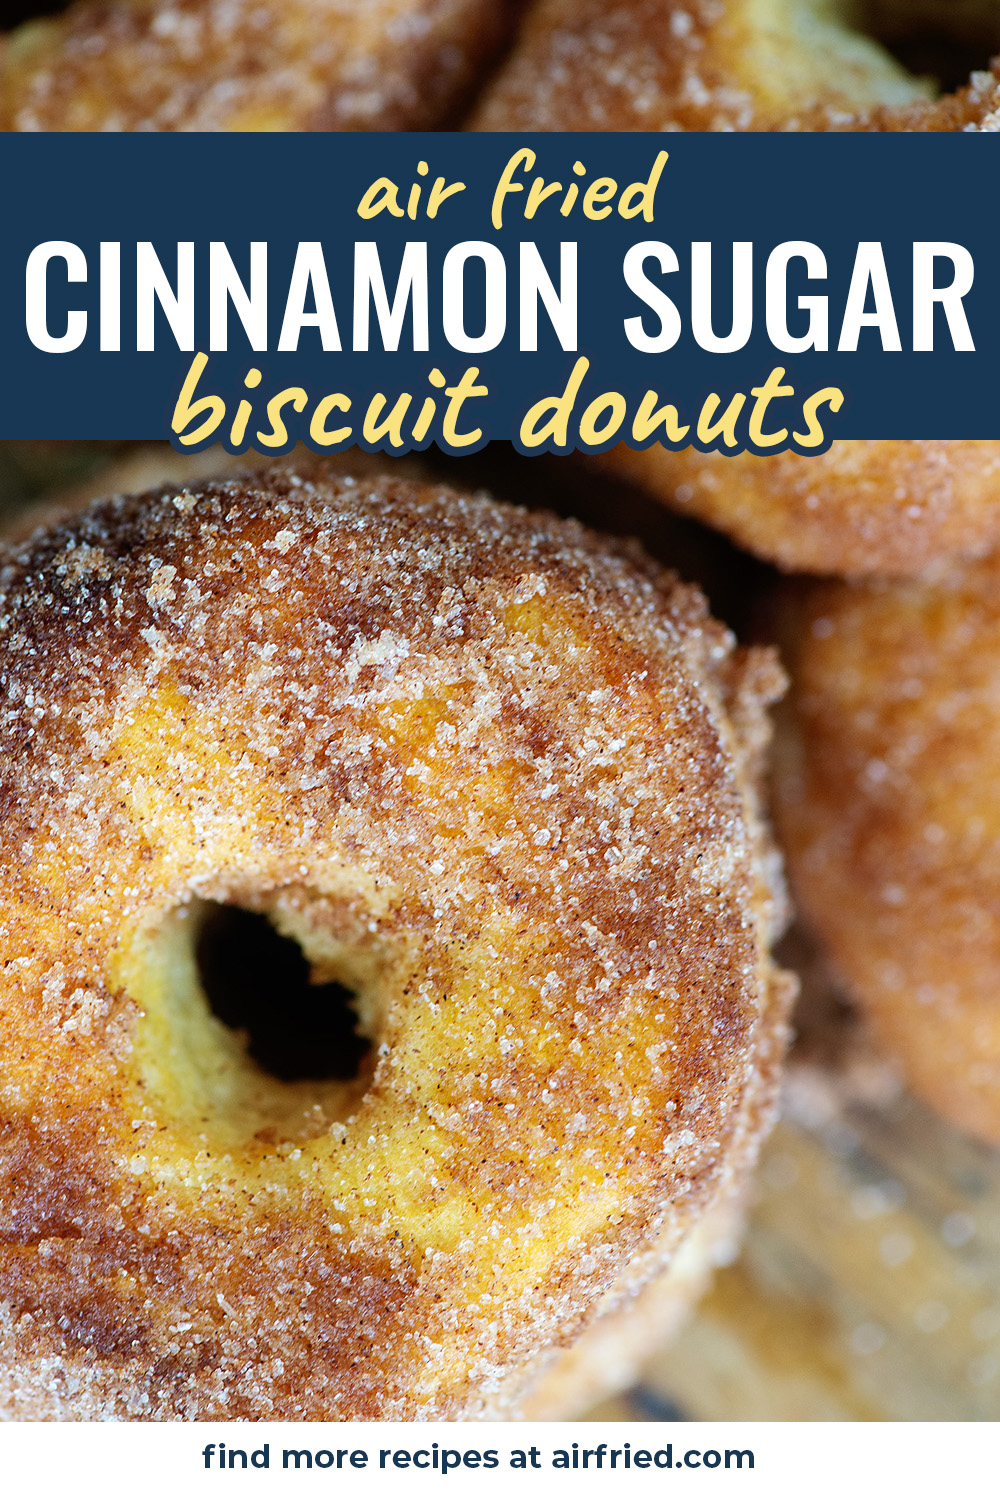 Biscuit donuts are easy enough for kids to cook them in the air fryer! #airfried #donuts #easyrecipes